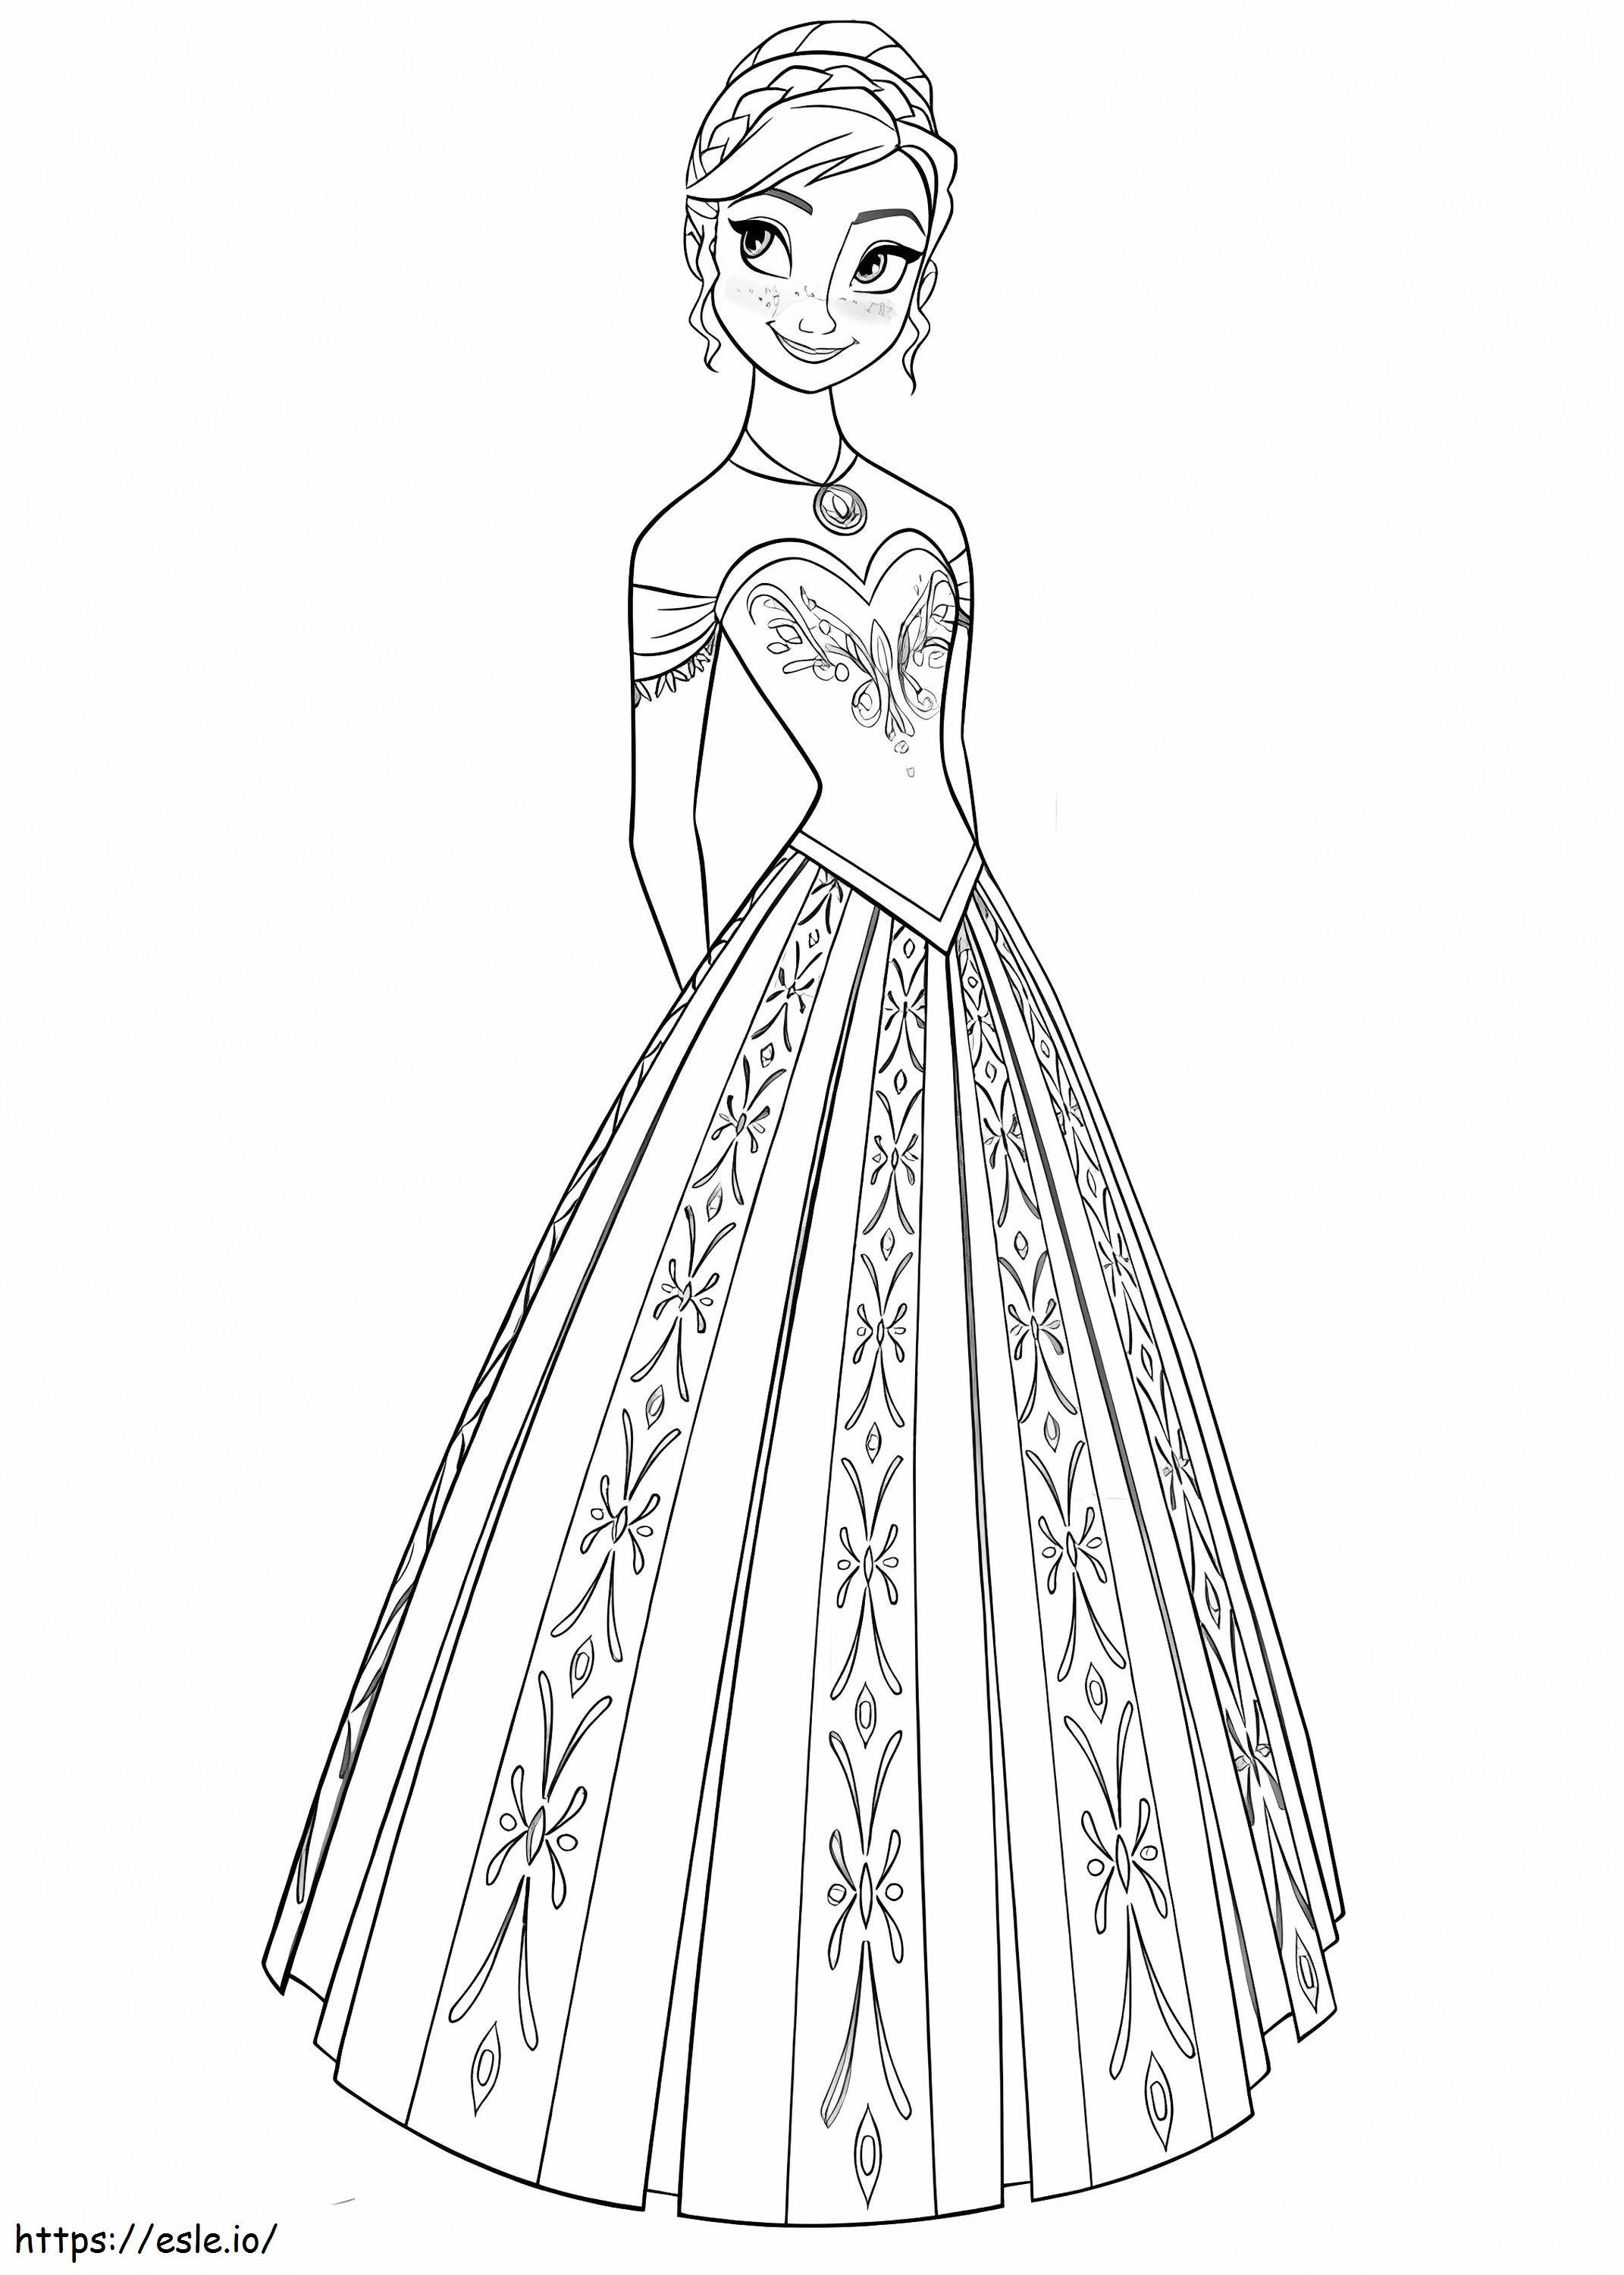 Frozen 09 coloring page